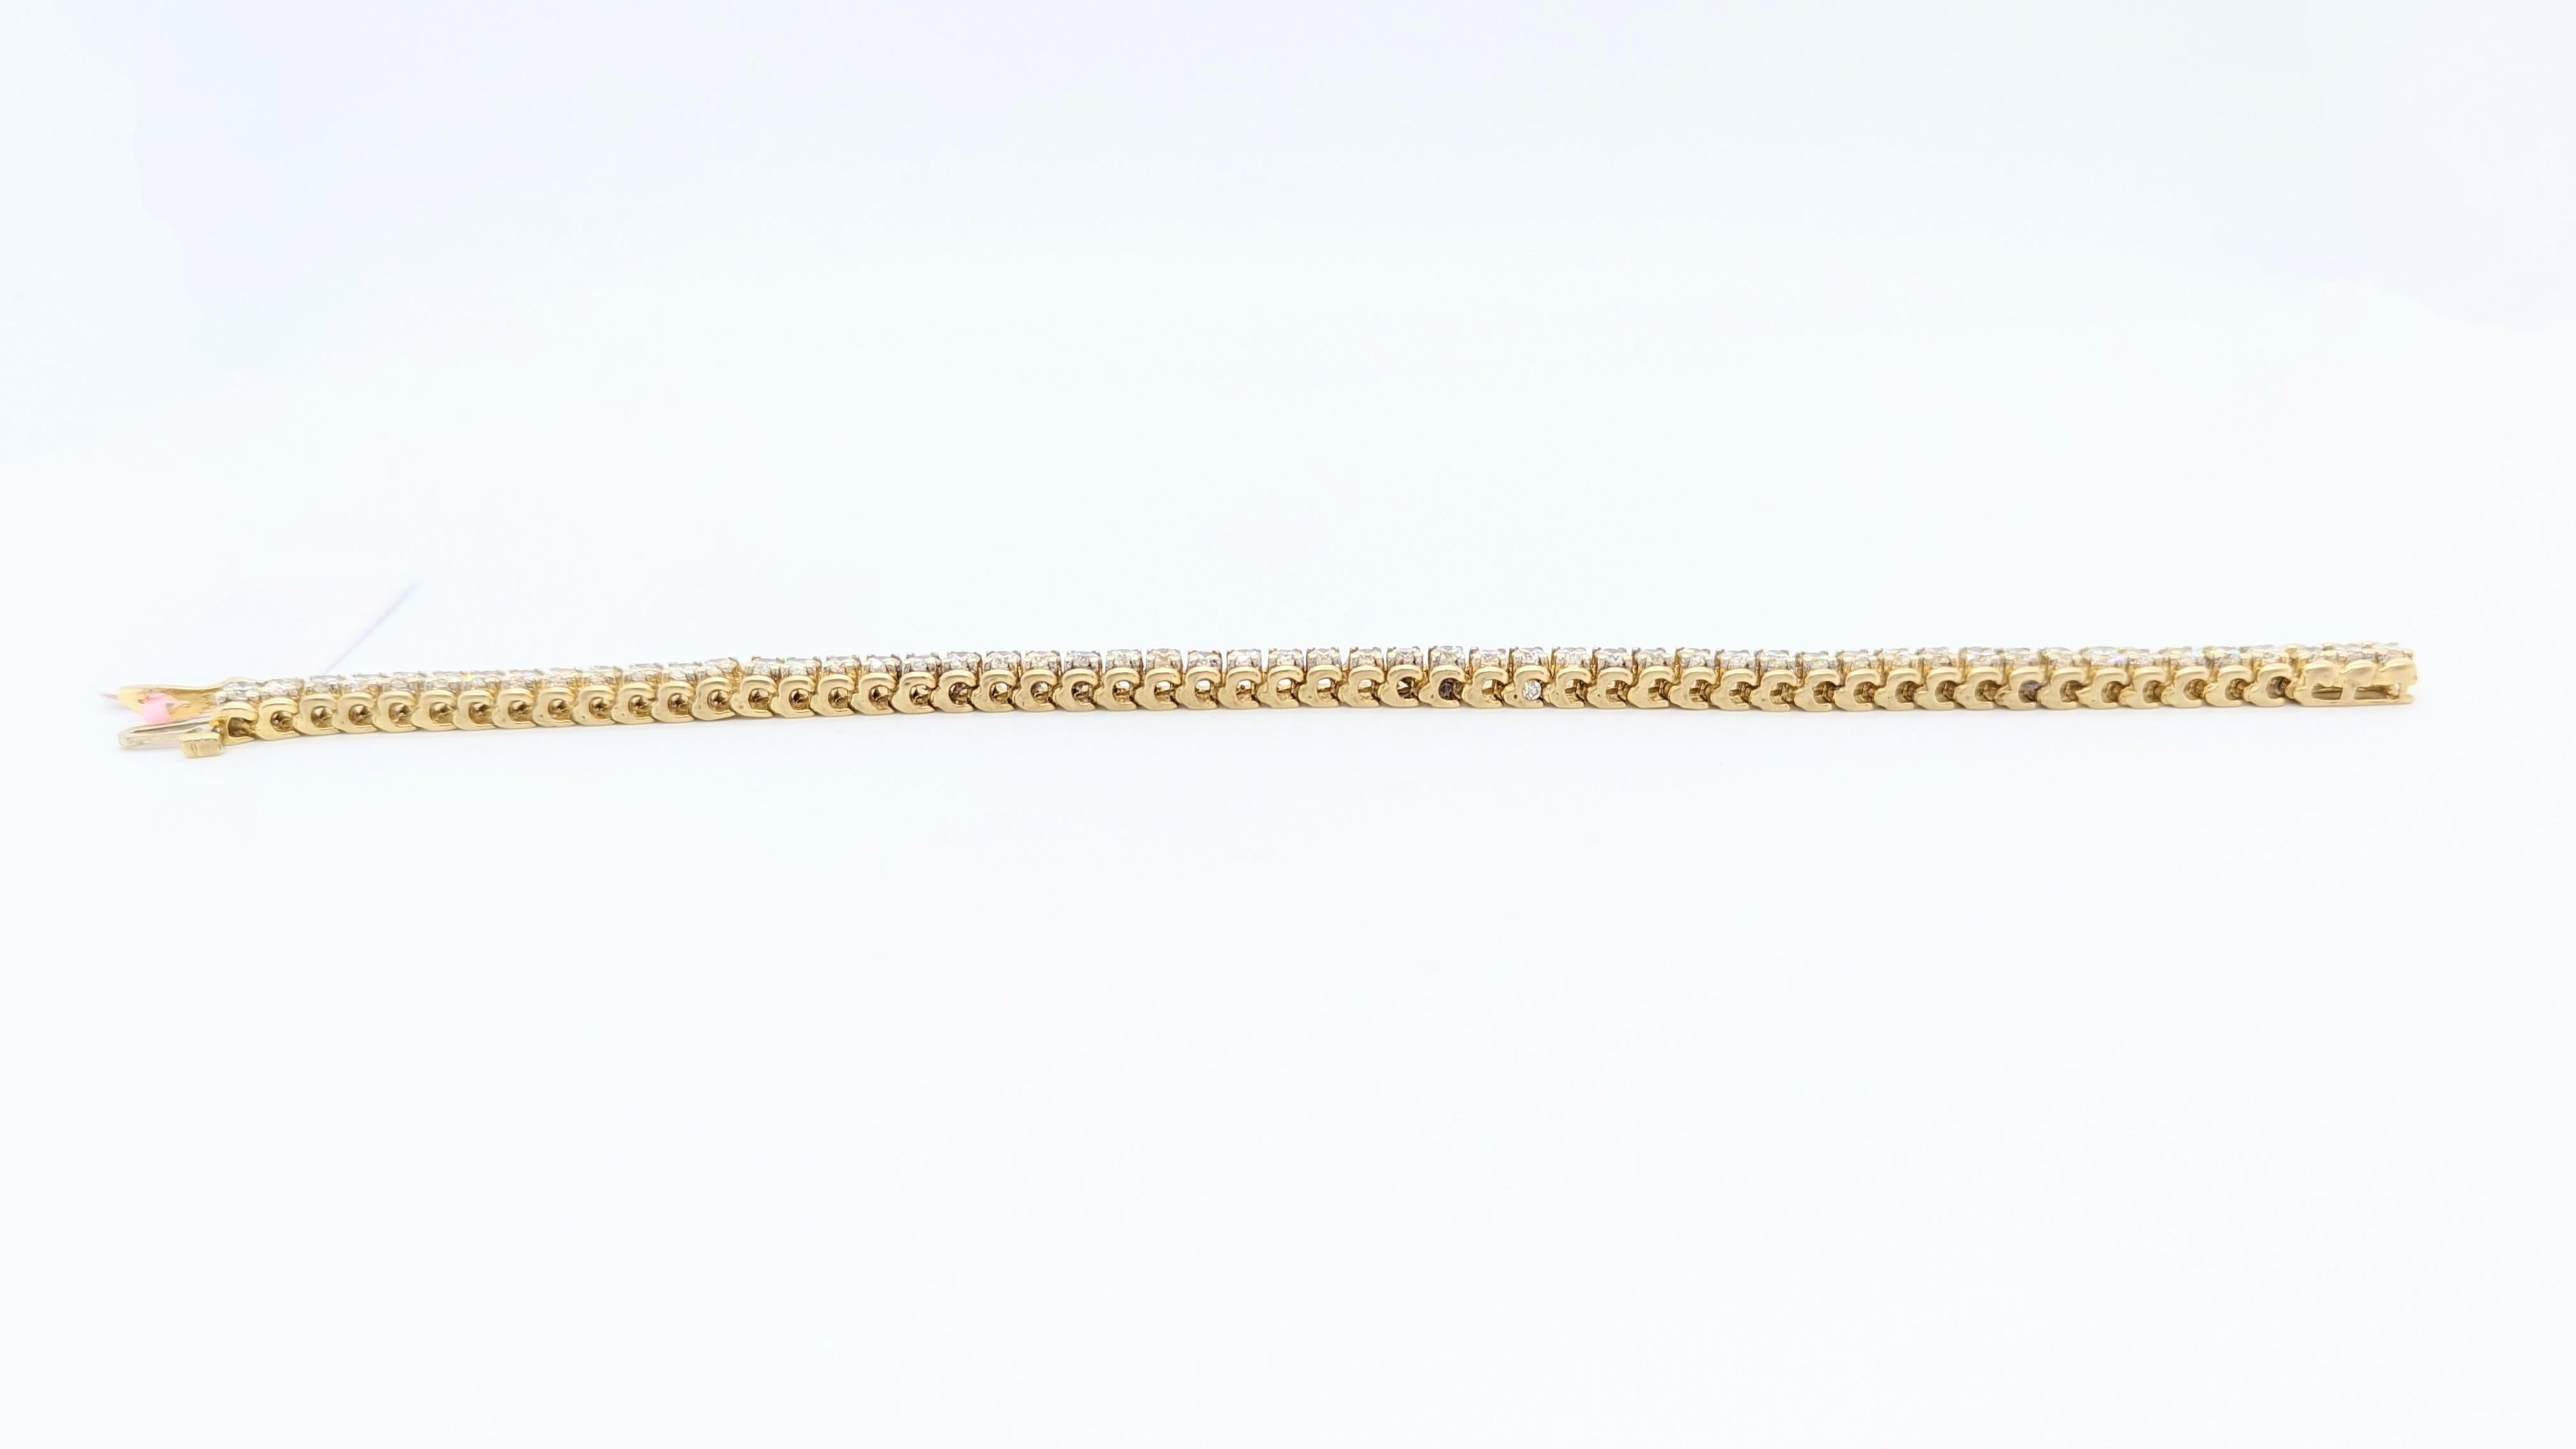 Beautiful white diamond round bracelet with 54 good quality bright stones.  Handmade in 14k yellow gold.  Length is 7